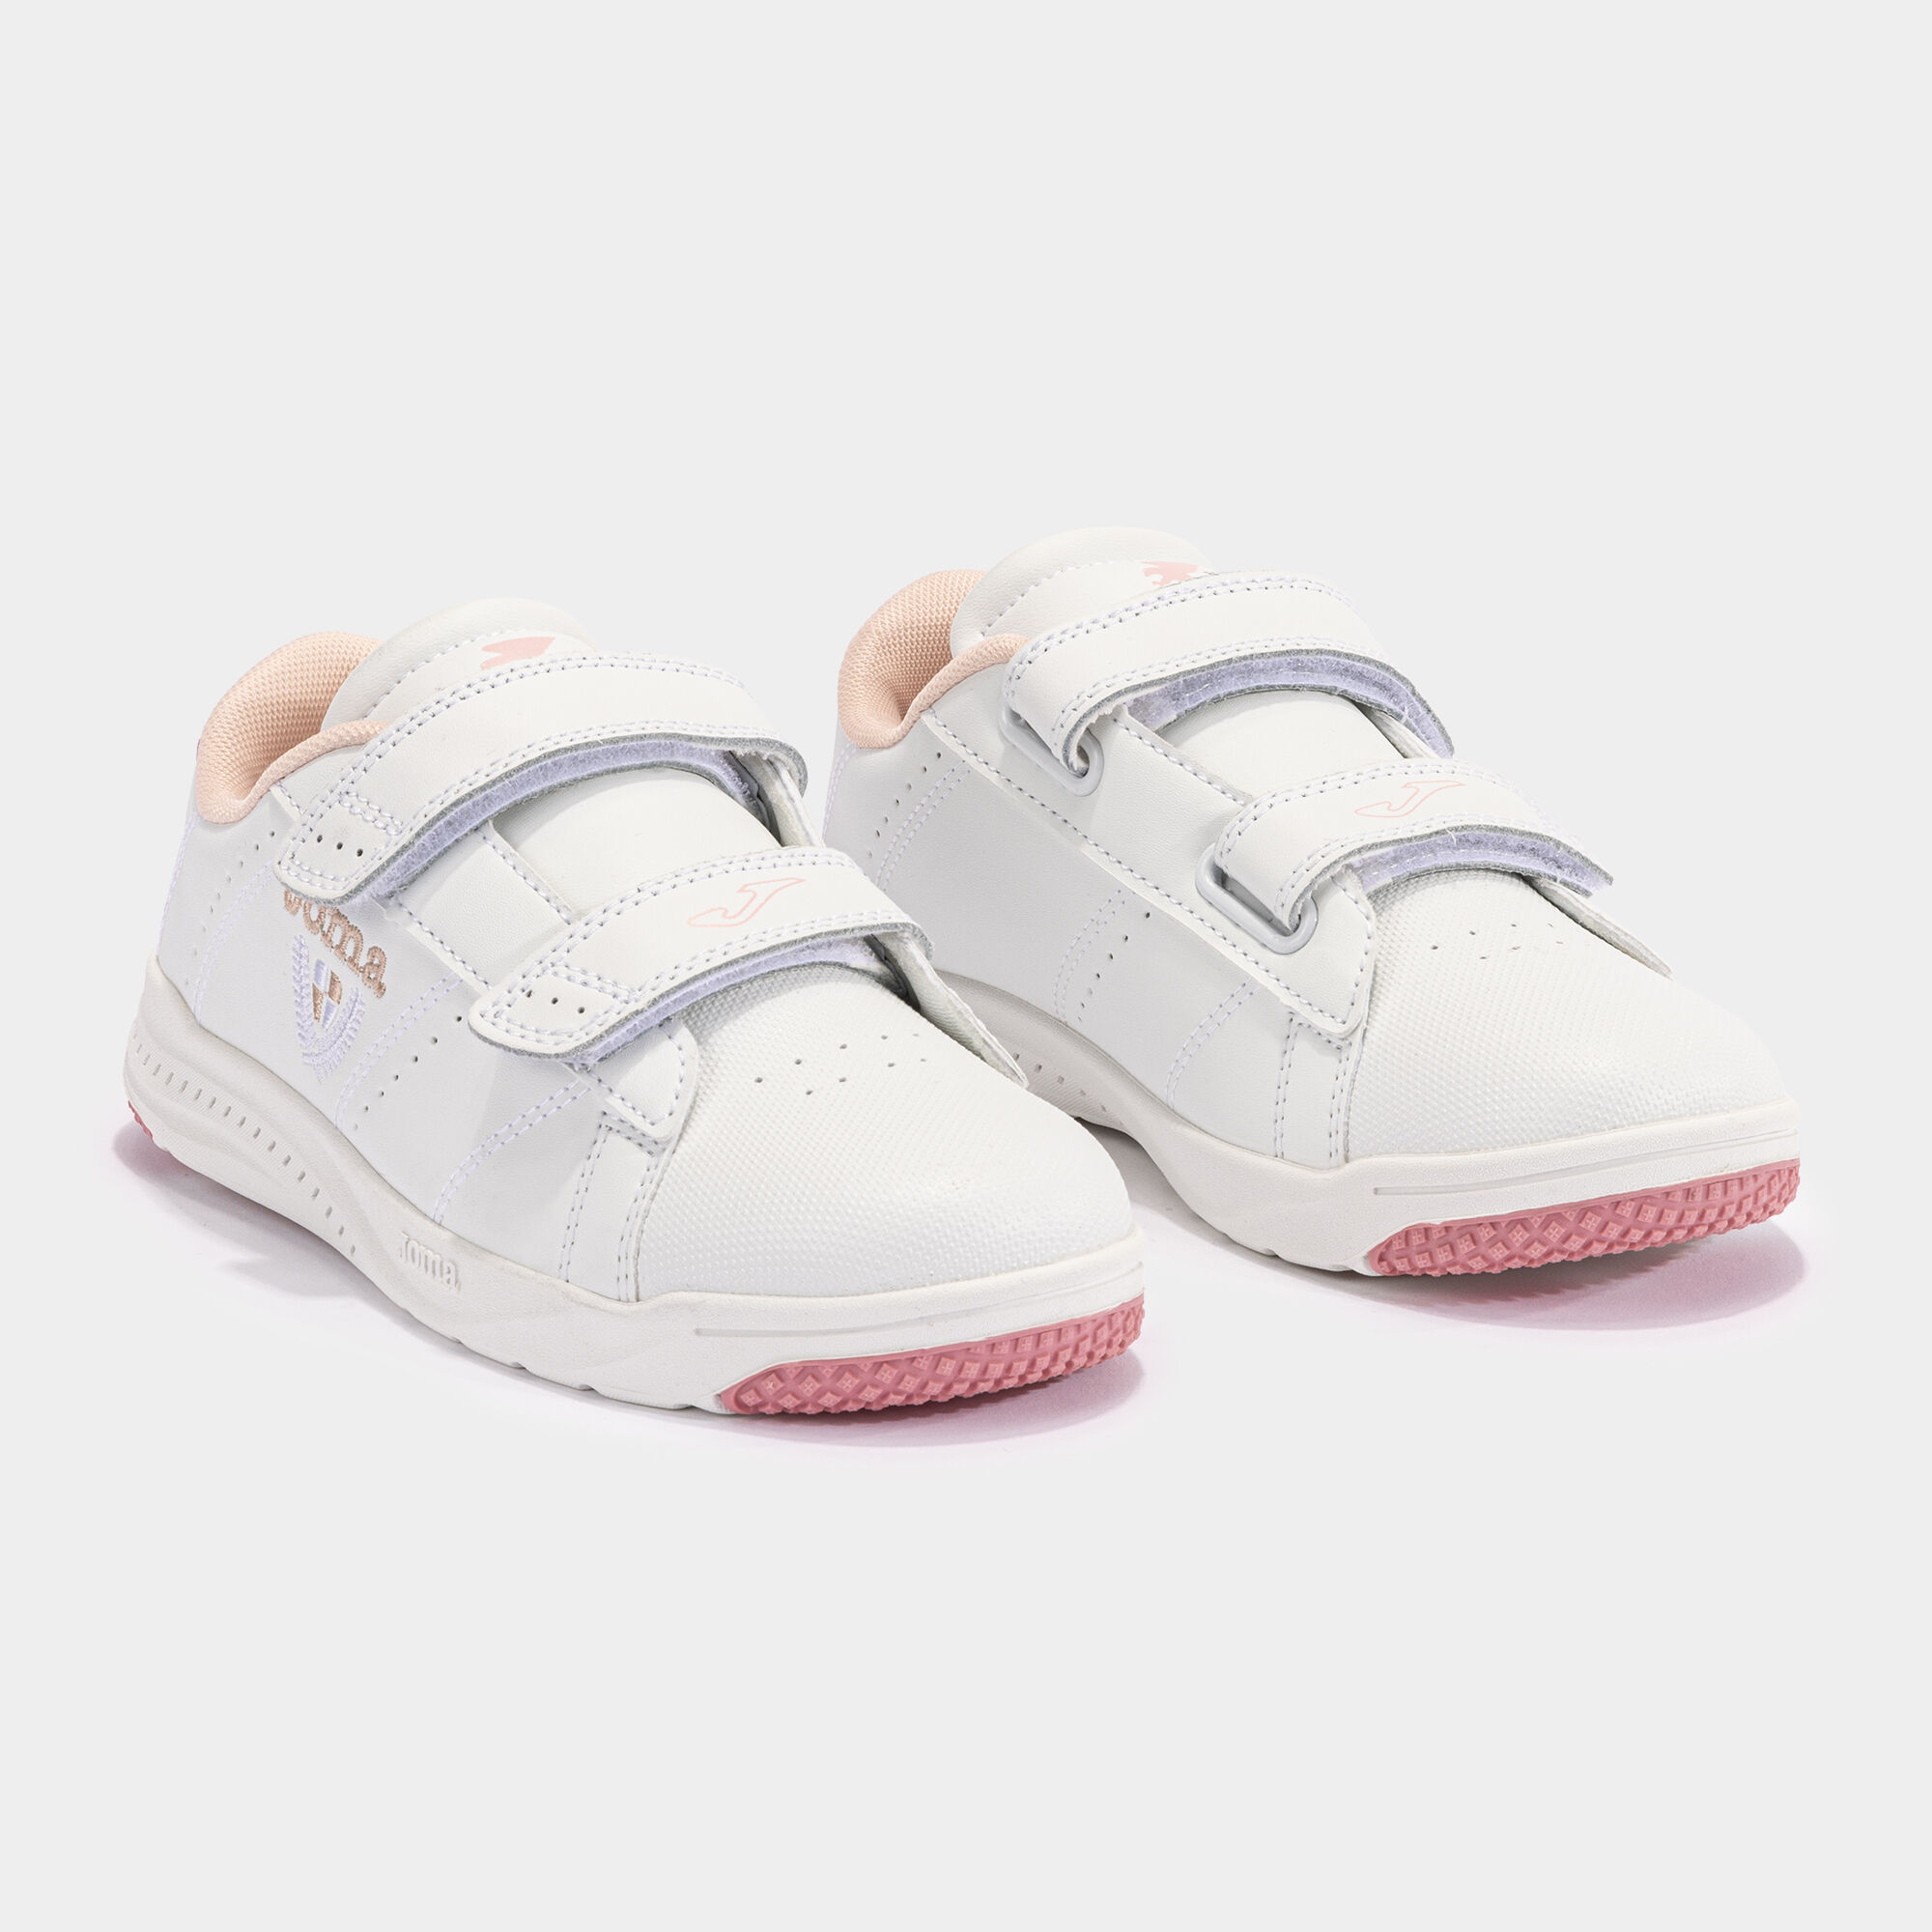 Chaussures casual W.Play Jr 23 junior blanc rose